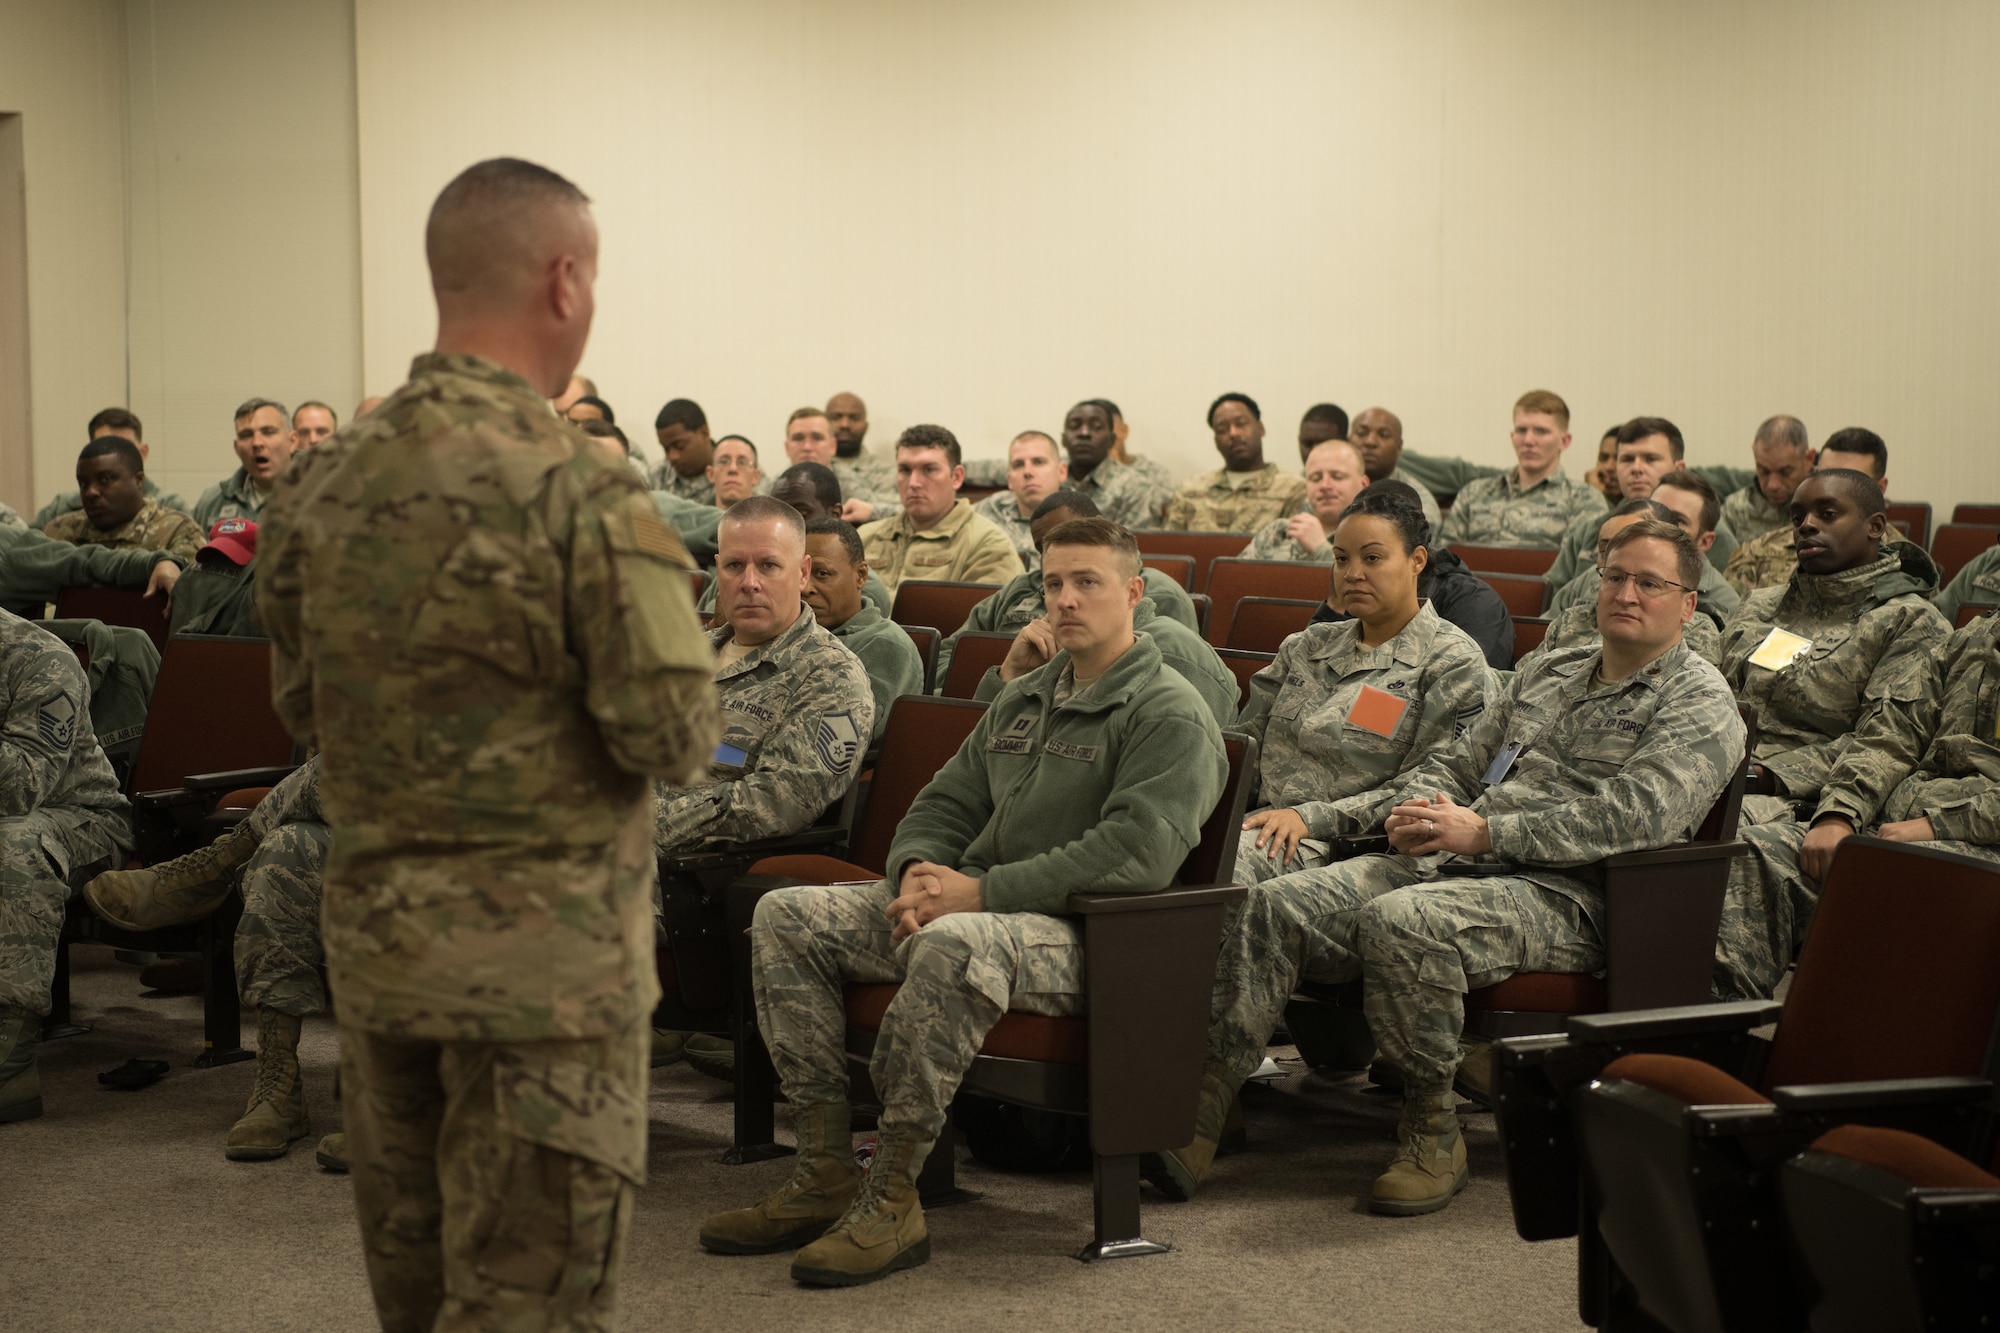 A leader addresses a group of Airmen